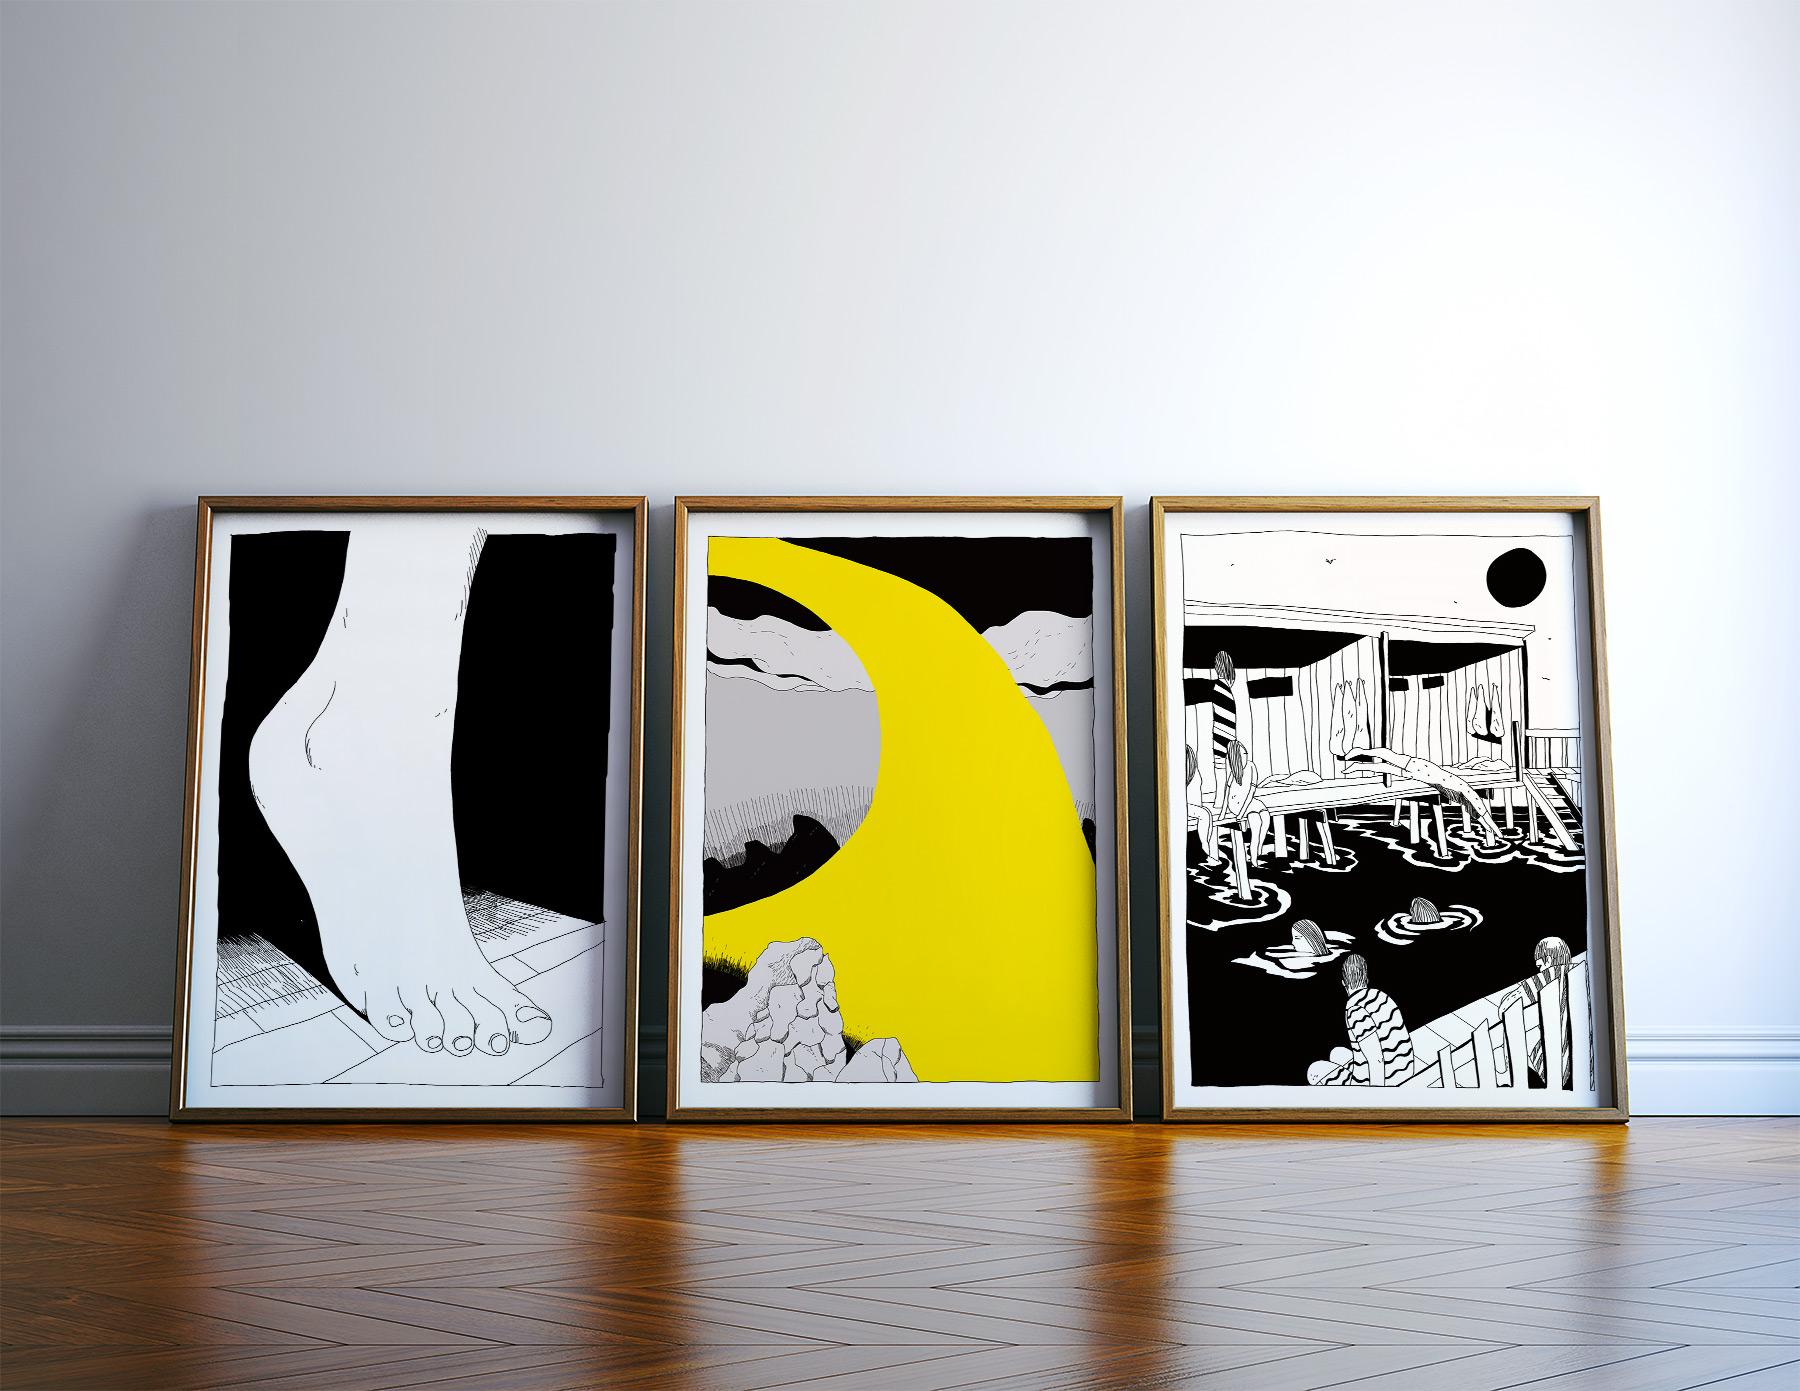 posters-prints, giclee-print, abstract, graphical, illustrative, landscape, cartoons, movement, nature, black, grey, yellow, paper, abstract-forms, contemporary-art, danish, decorative, design, interior, interior-design, modern, modern-art, nordic, posters, prints, scandinavien, scenery, Buy original high quality art. Paintings, drawings, limited edition prints & posters by talented artists.